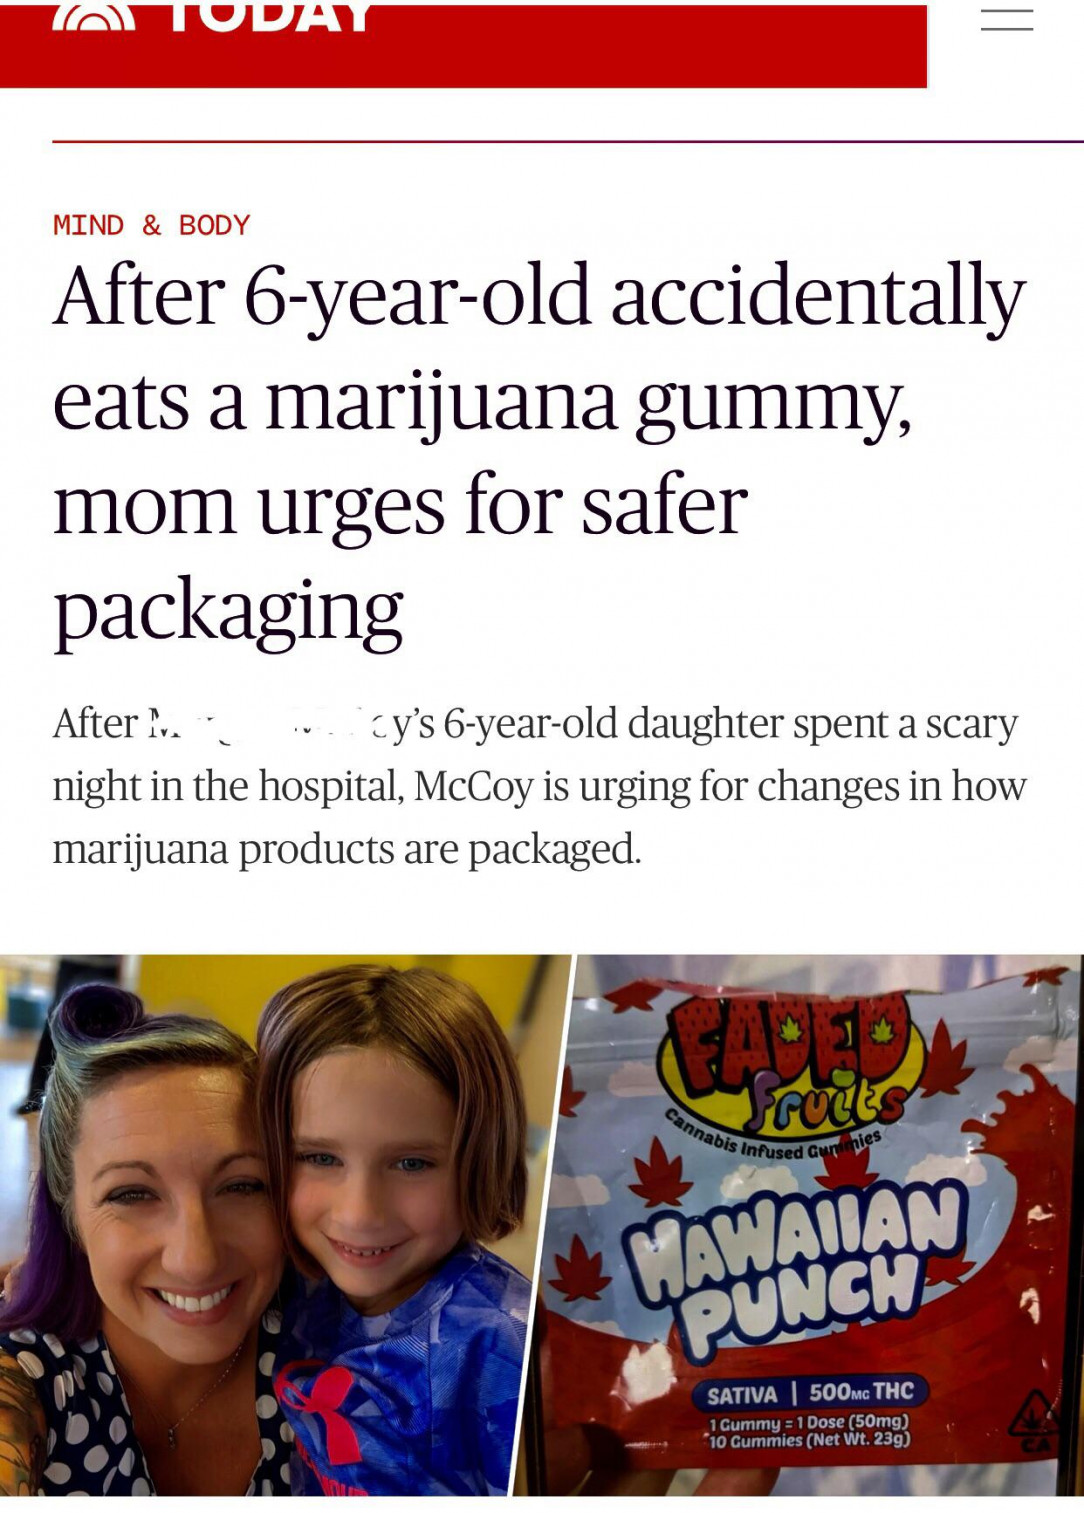 Mom leaves edibles in area accessible to 6 year old who ingests large dose, which turns mom into raging Karen